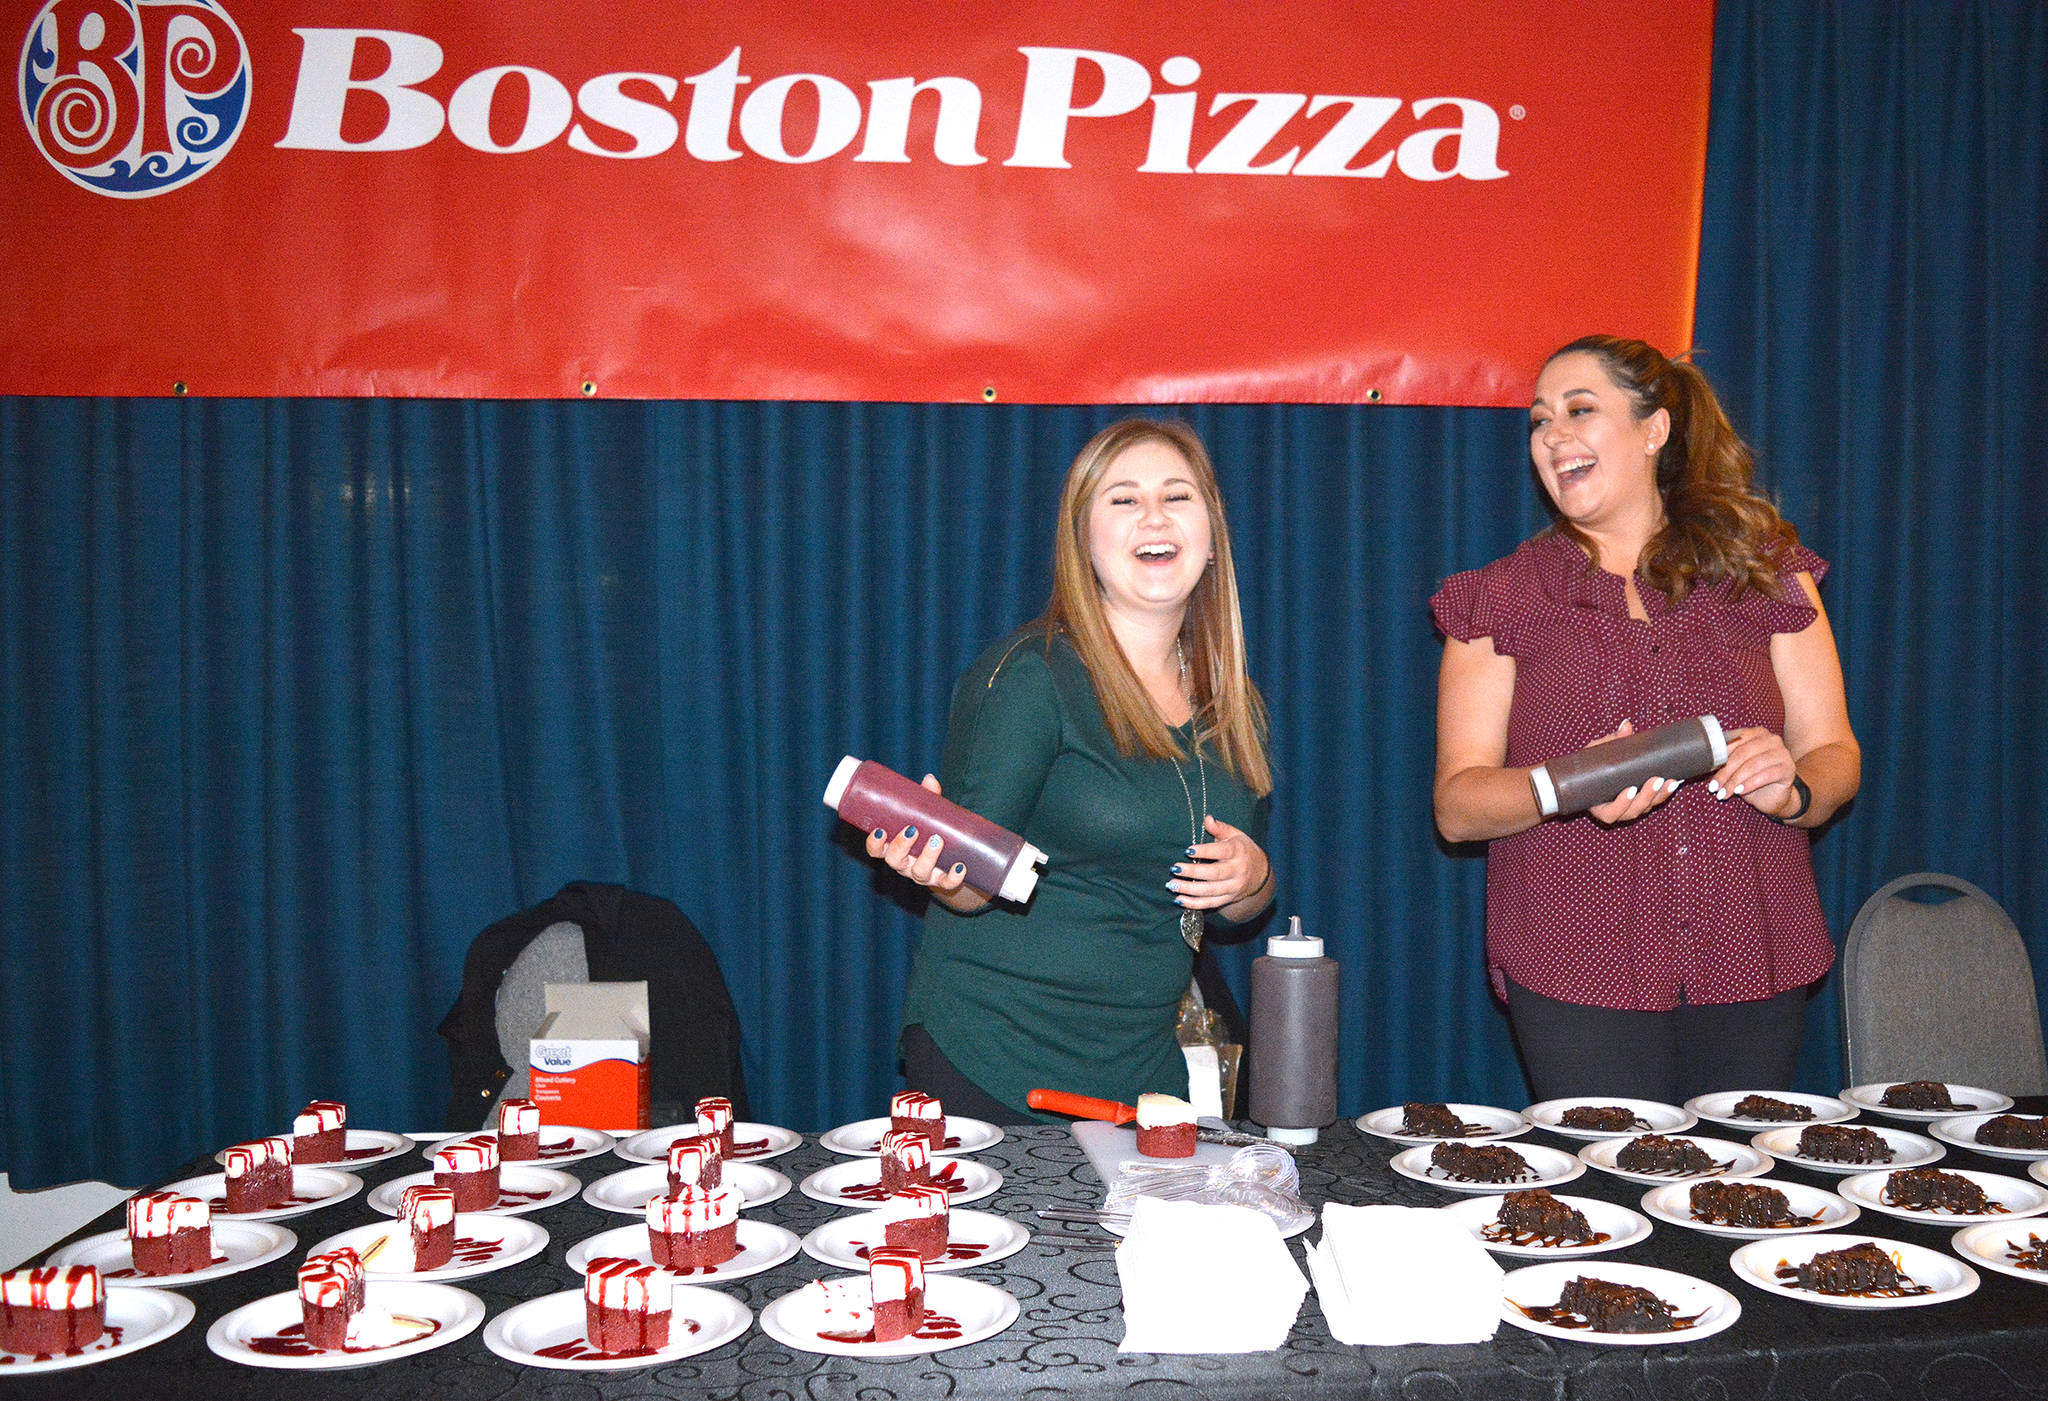 Sarah Tschrieter and Paige Martin from Stettler Boston Pizza decorate delicious desserts during Taste of Stettler at the Hub on Sept. 21. Lisa Joy/Stettler Independent